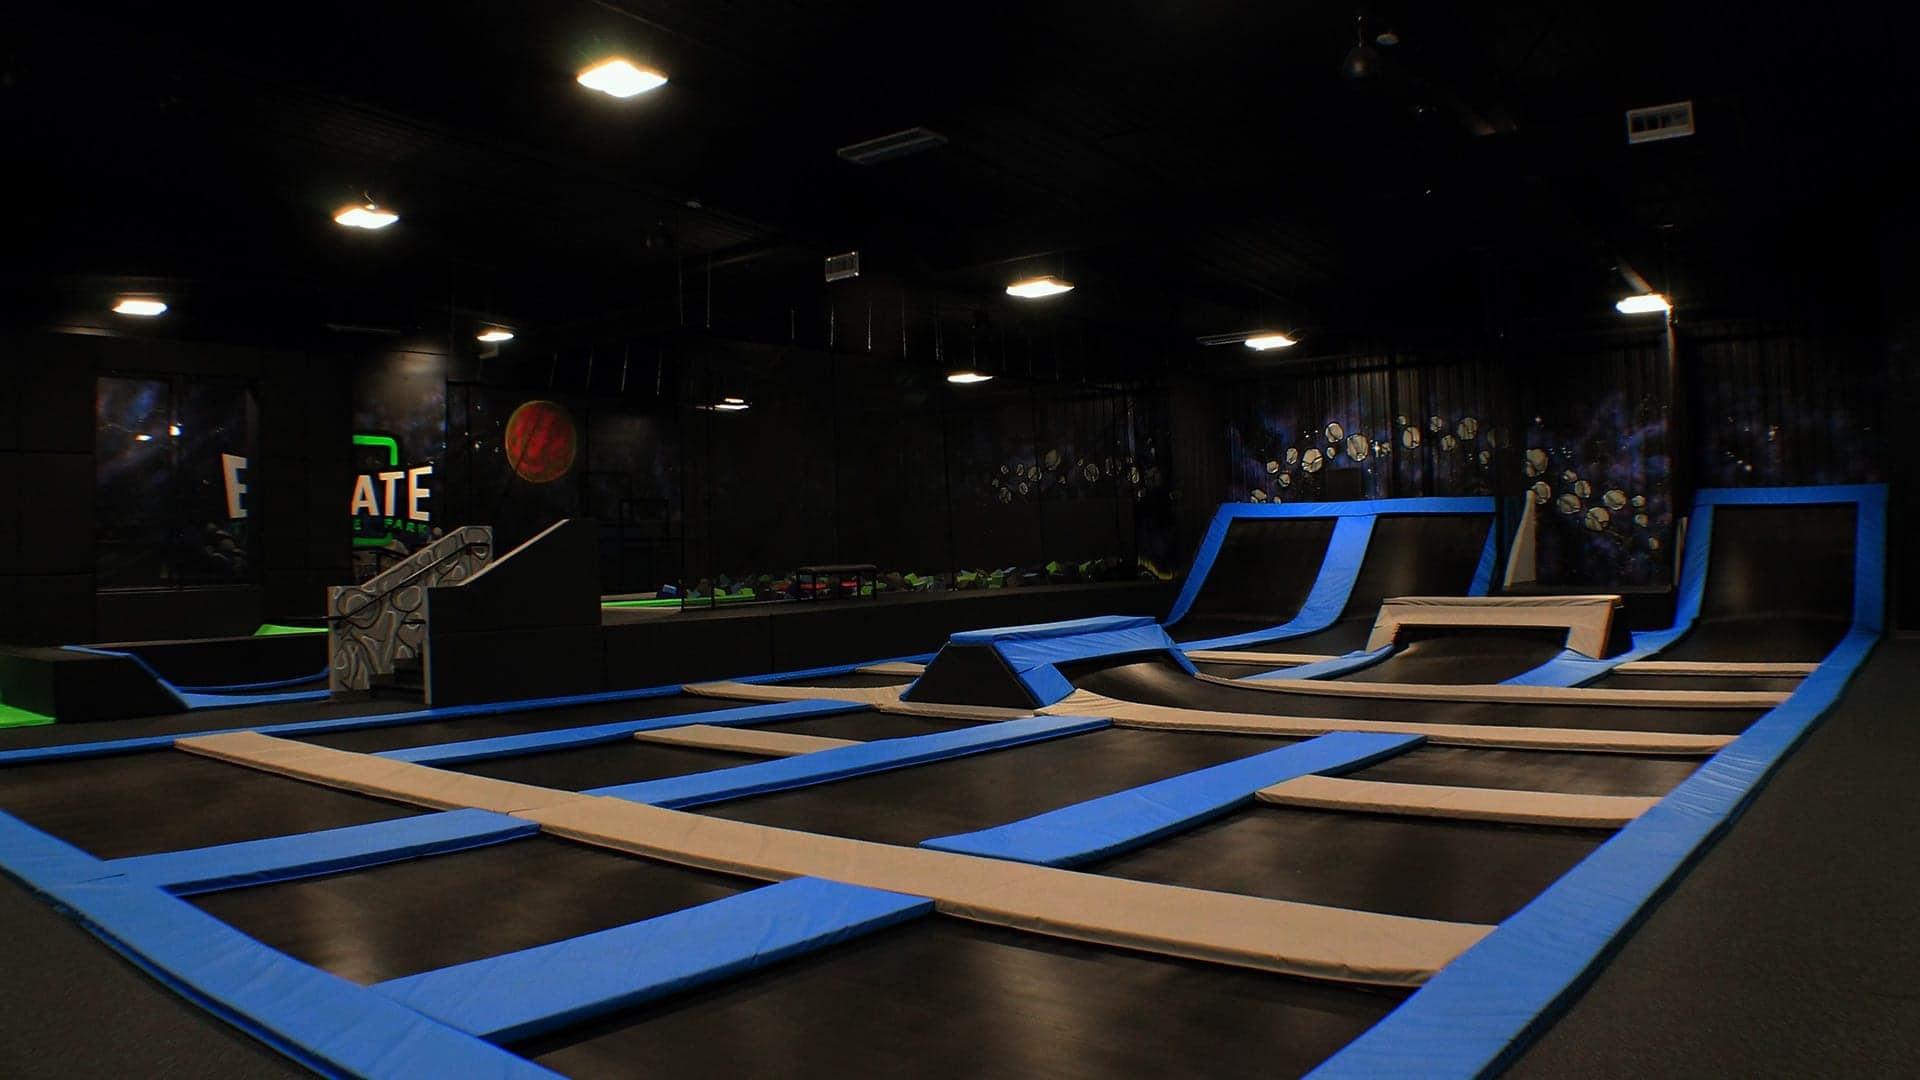 Indoor trampoline places, Trampolining sport, Play sessions, Airborne fun, 1920x1080 Full HD Desktop